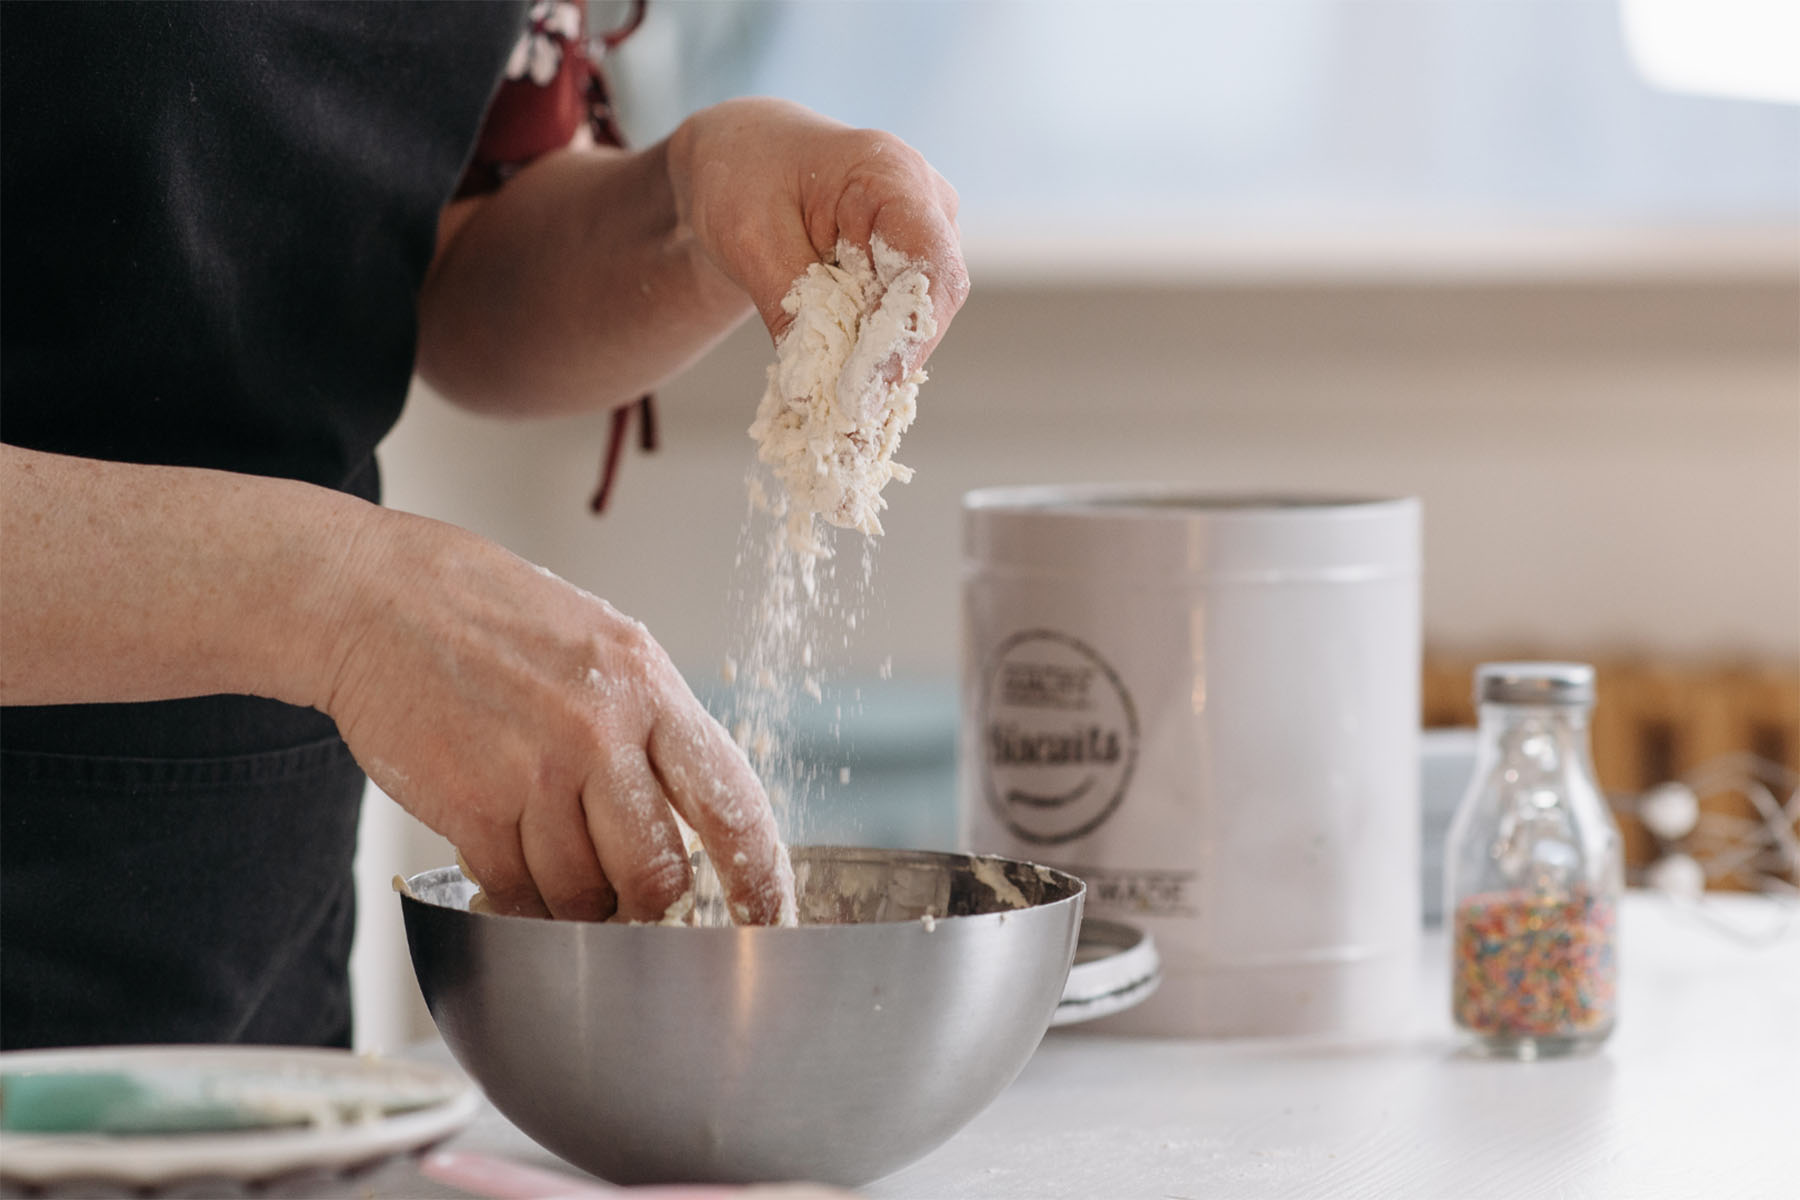 A person mixing baking ingredients in a bowl